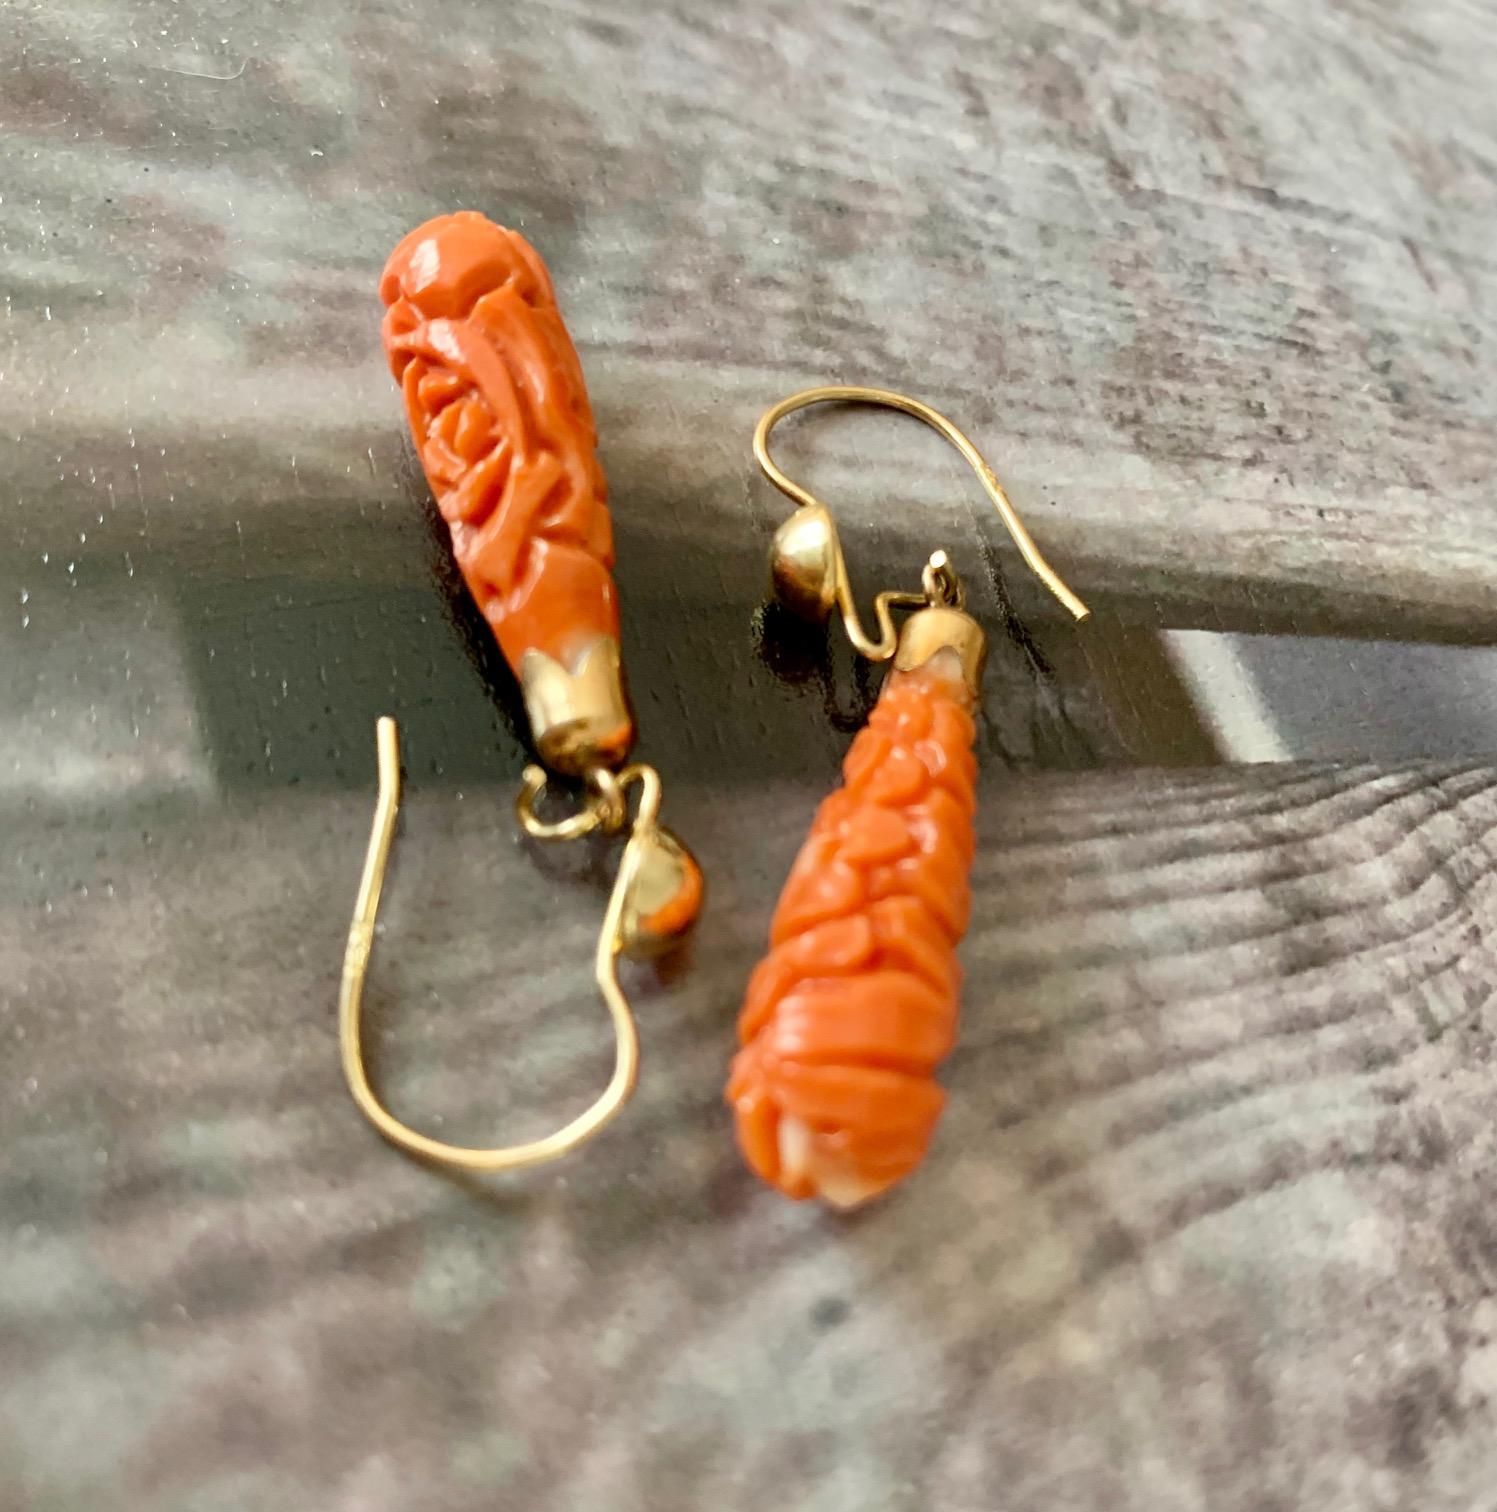 These earrings are stunning.  The workmanship is so lovely.  Each earring features a teardrop shaped carved Coral stone with an ear wire hook closure for extra security while wearing. 

Length:  1 1/2